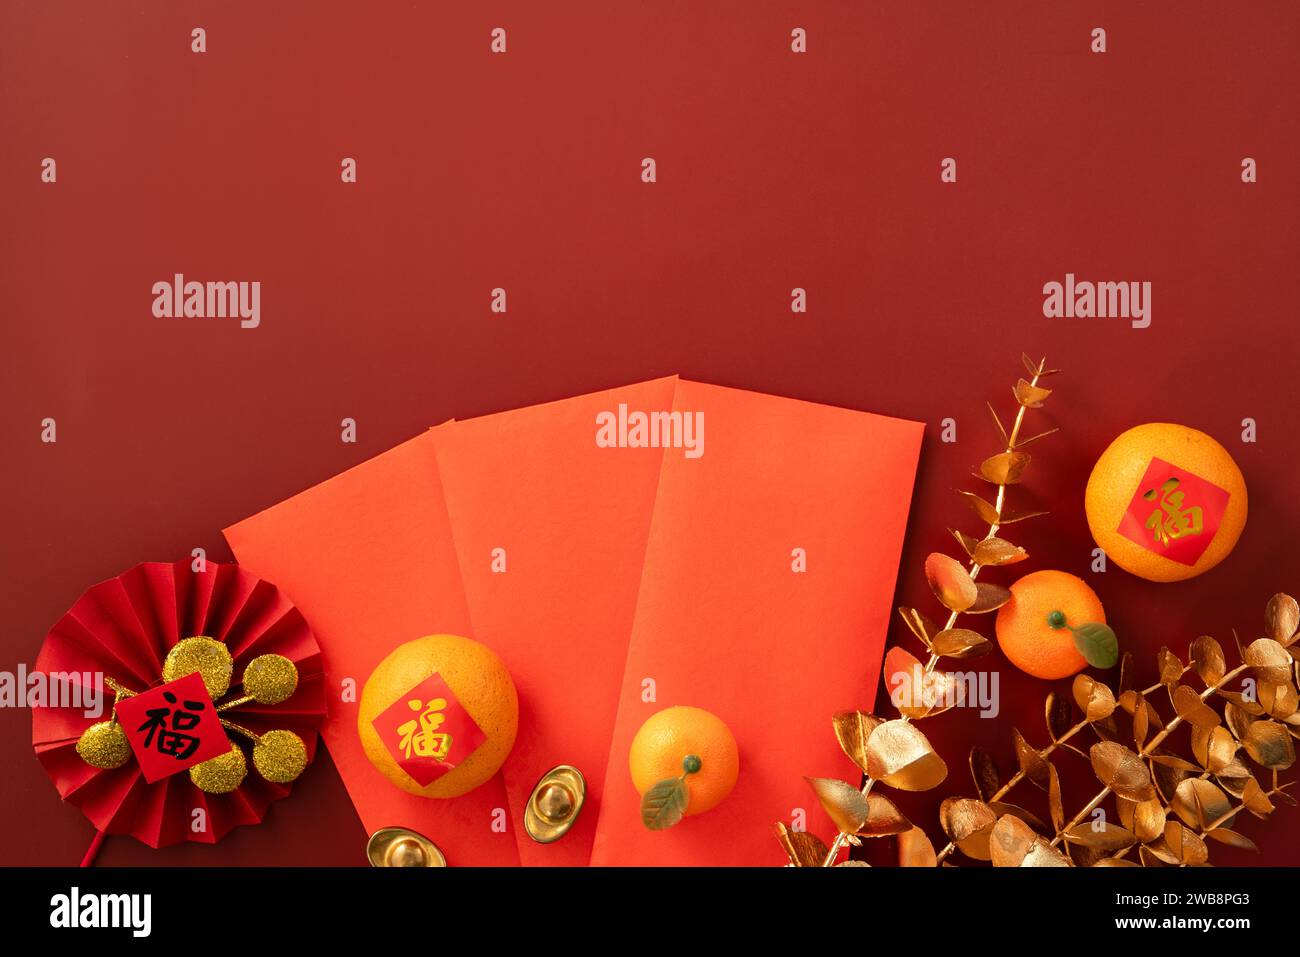 Chinese lunar new year background with fresh tangerine, red envelope, paper fan and decorations for Spring Festival and the word means fortune. Stock Photo